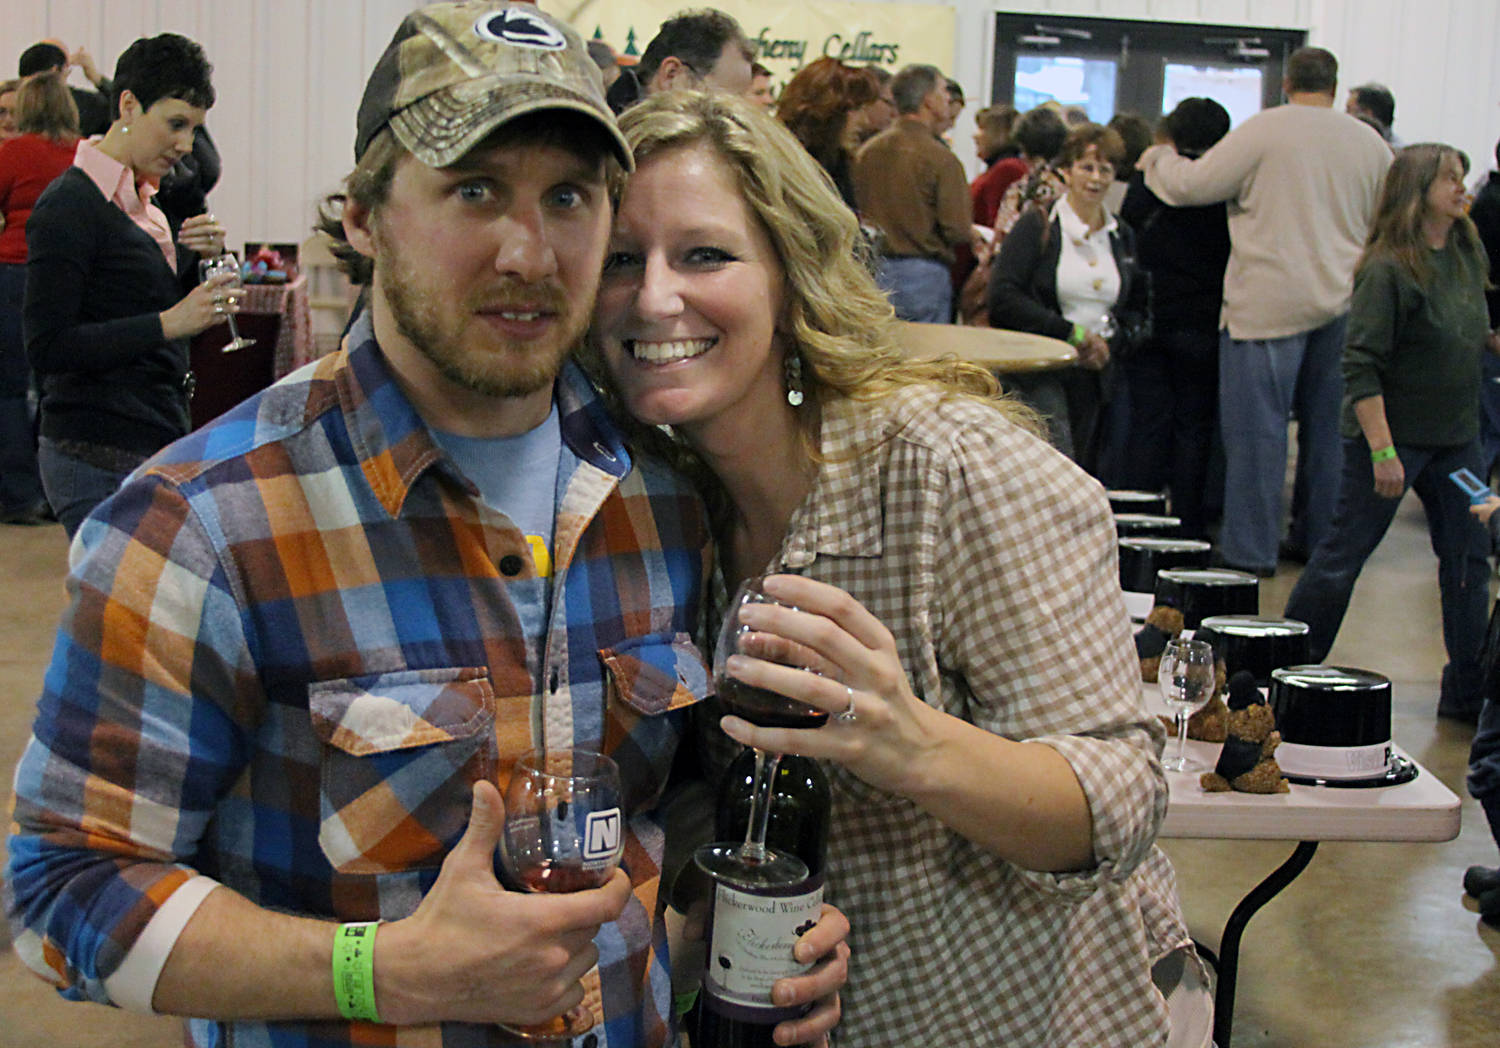 Justin Owens and Sherri Marena, of Woodland, stop enjoying some wine for a moment for a photo.